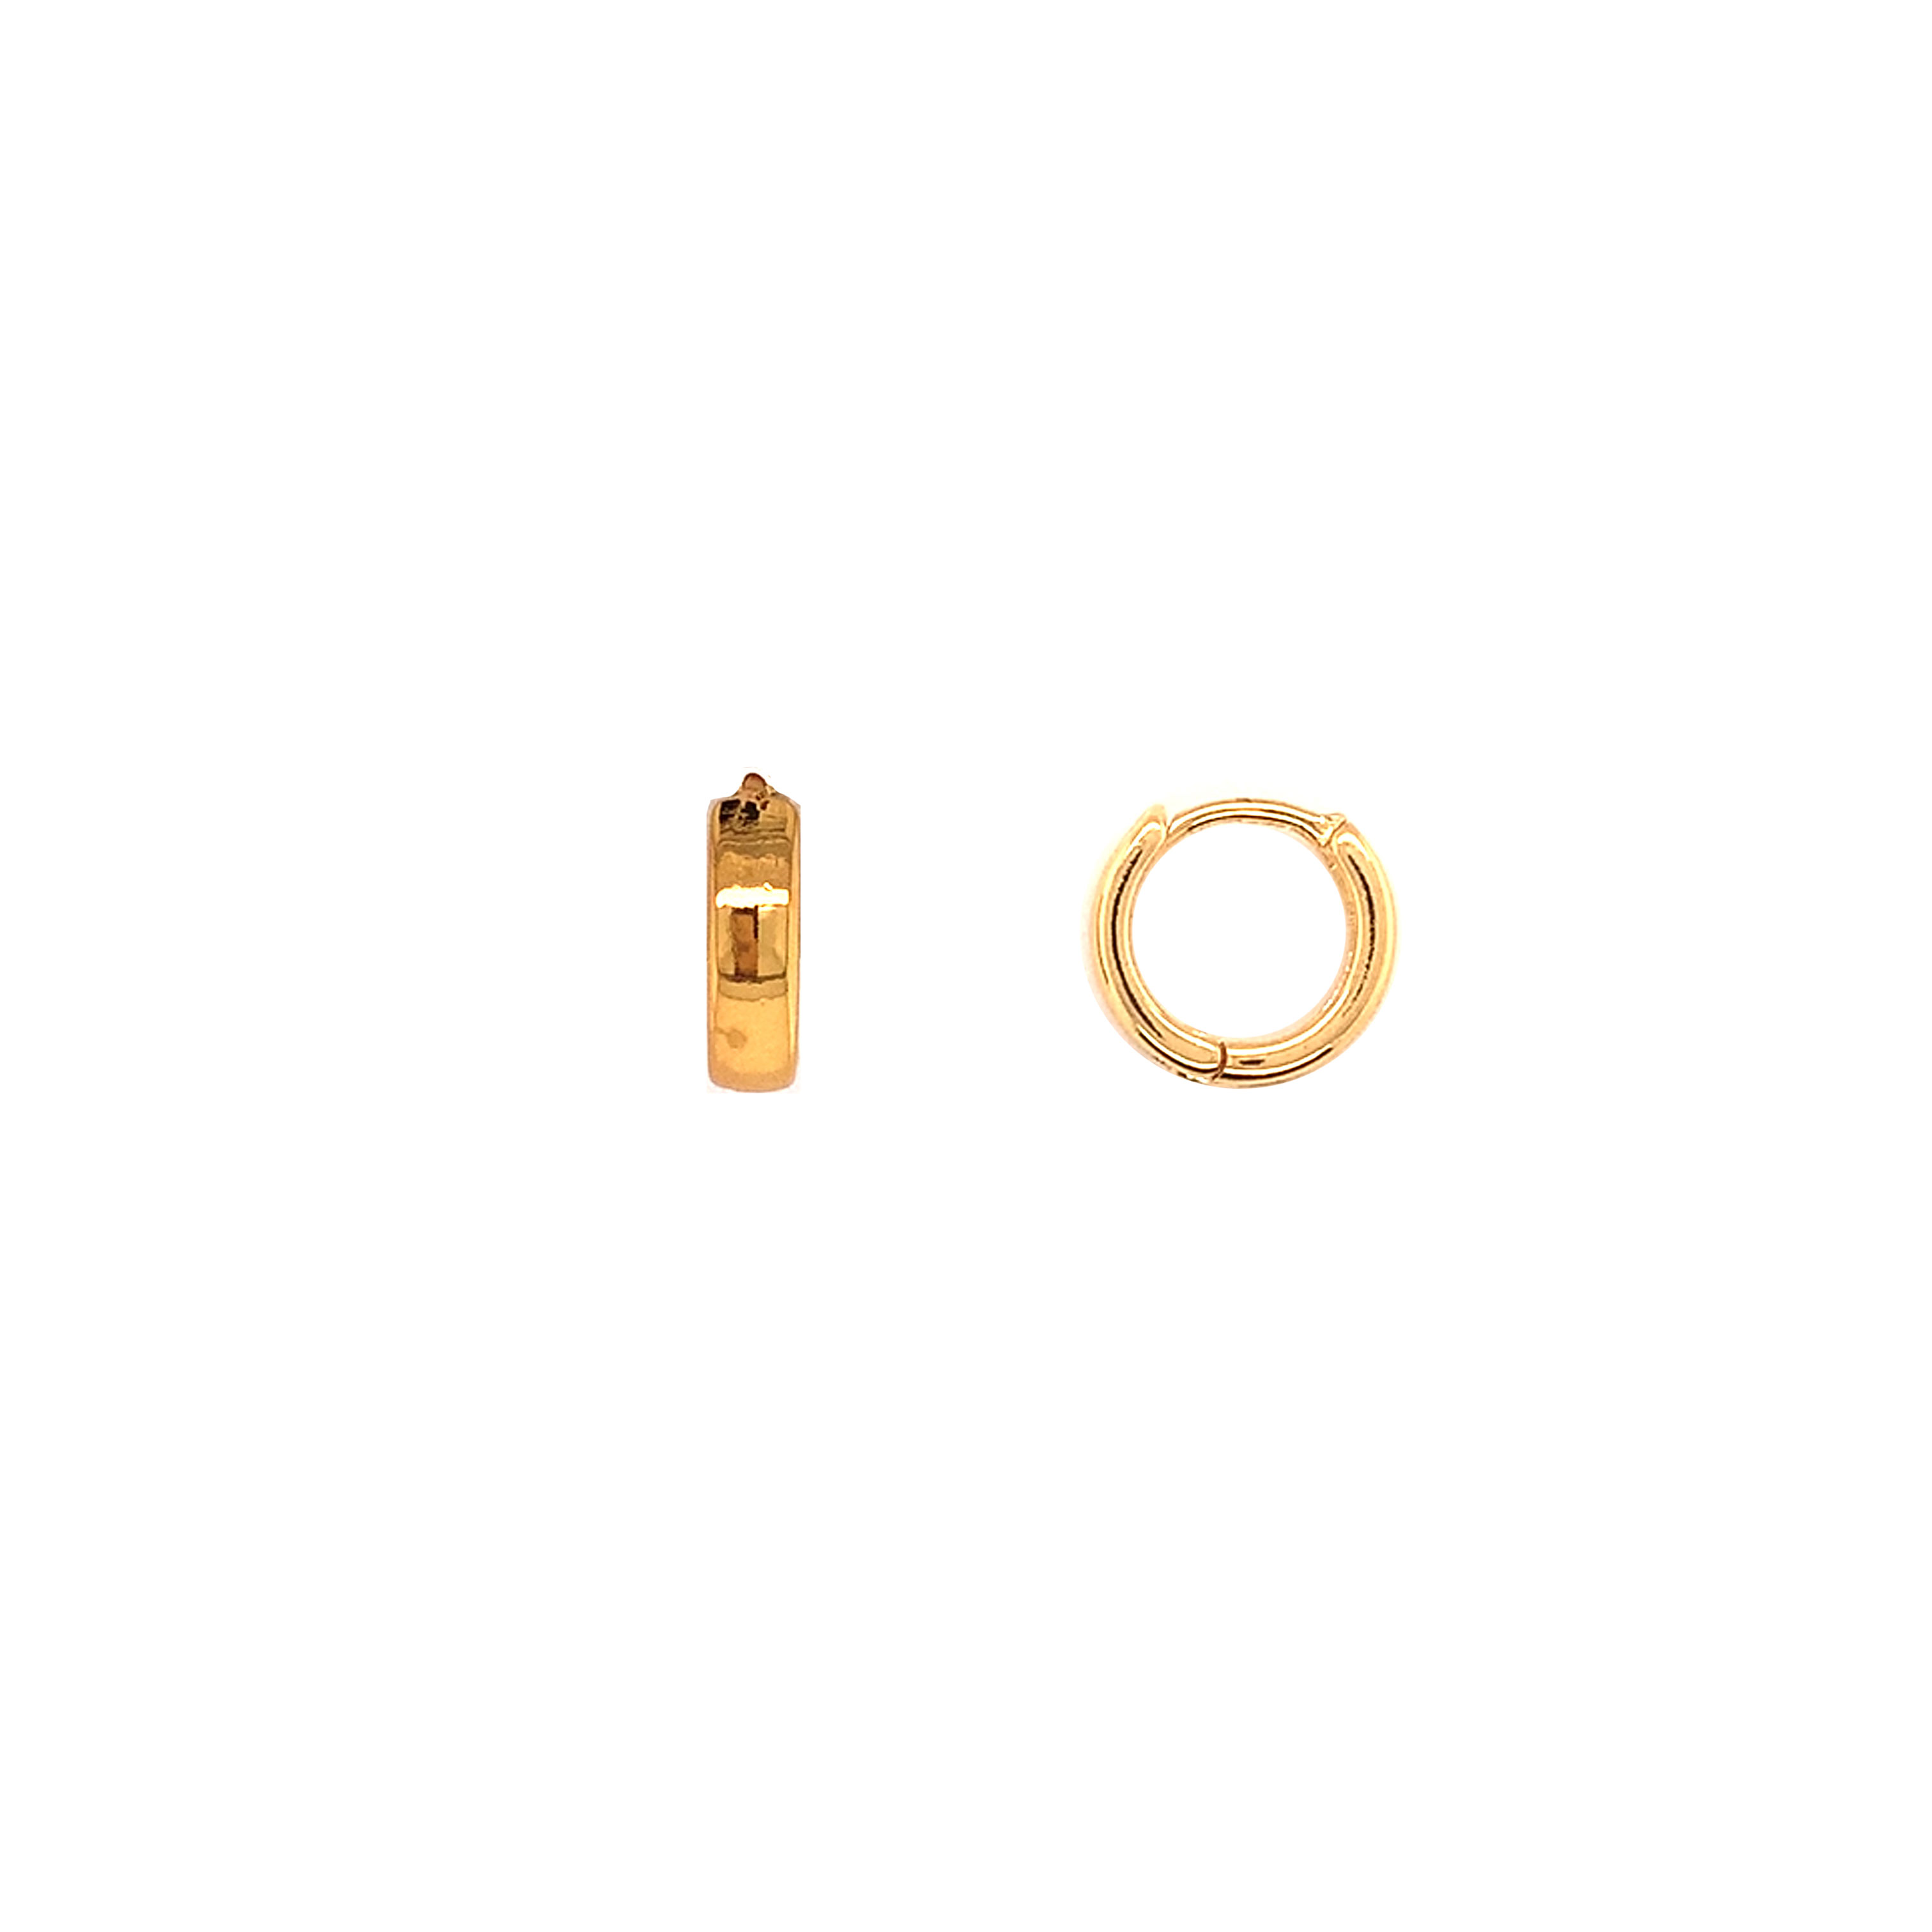 3mm x 11.5mm Hoops - Gold Filled